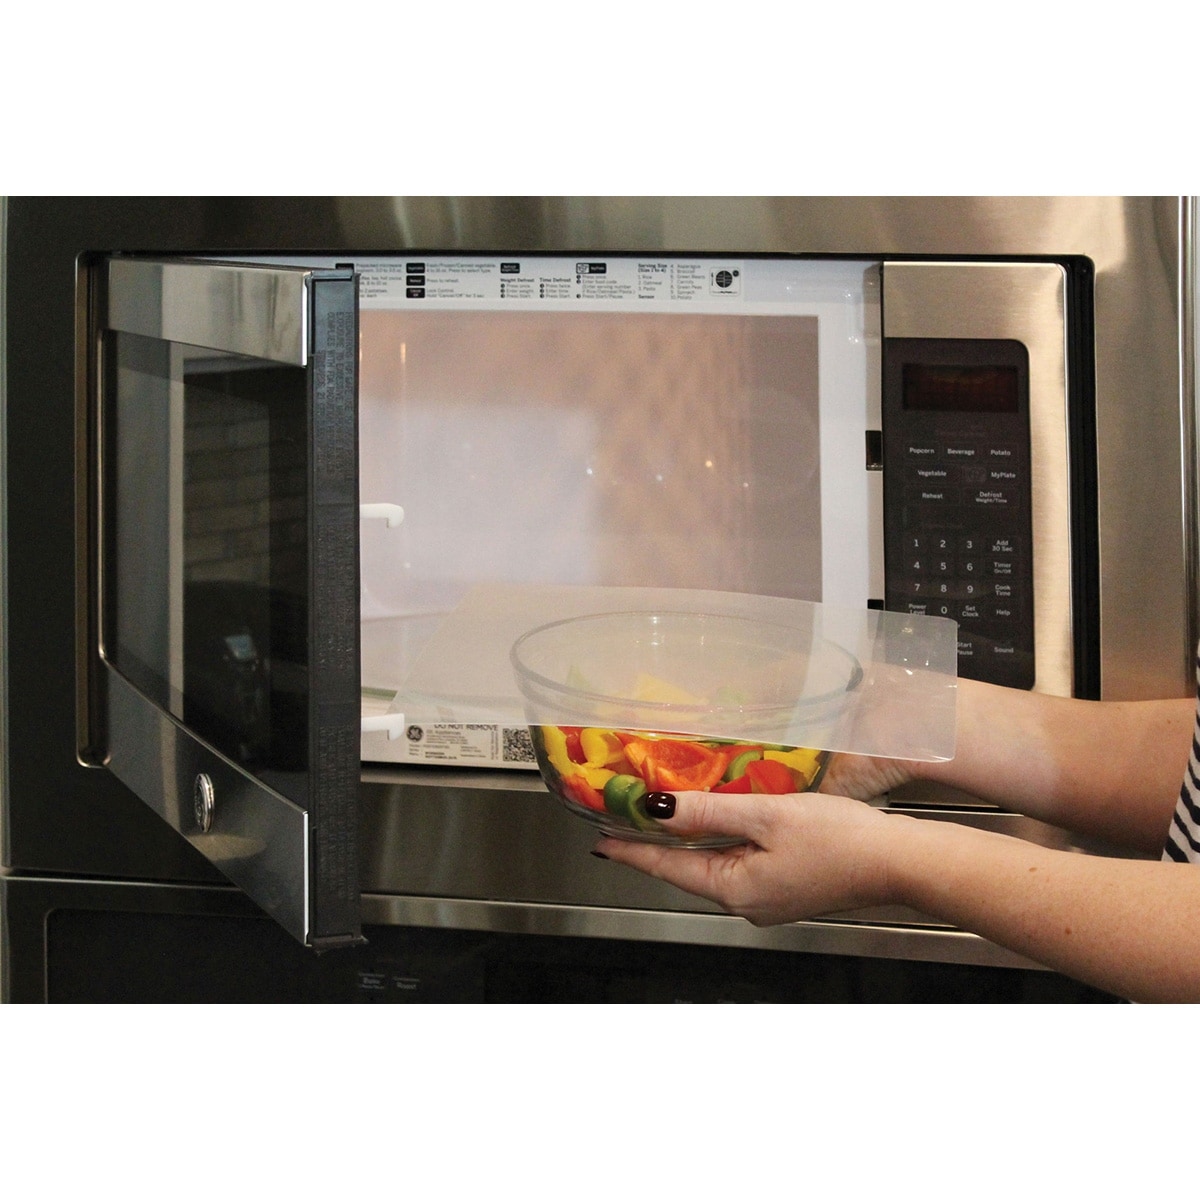 Set of 2 (10.5 inch) Microwave Splatter Cover, Microwave Cover for Food,  Large, Guard lid-NEW!! - Small Kitchen Appliances